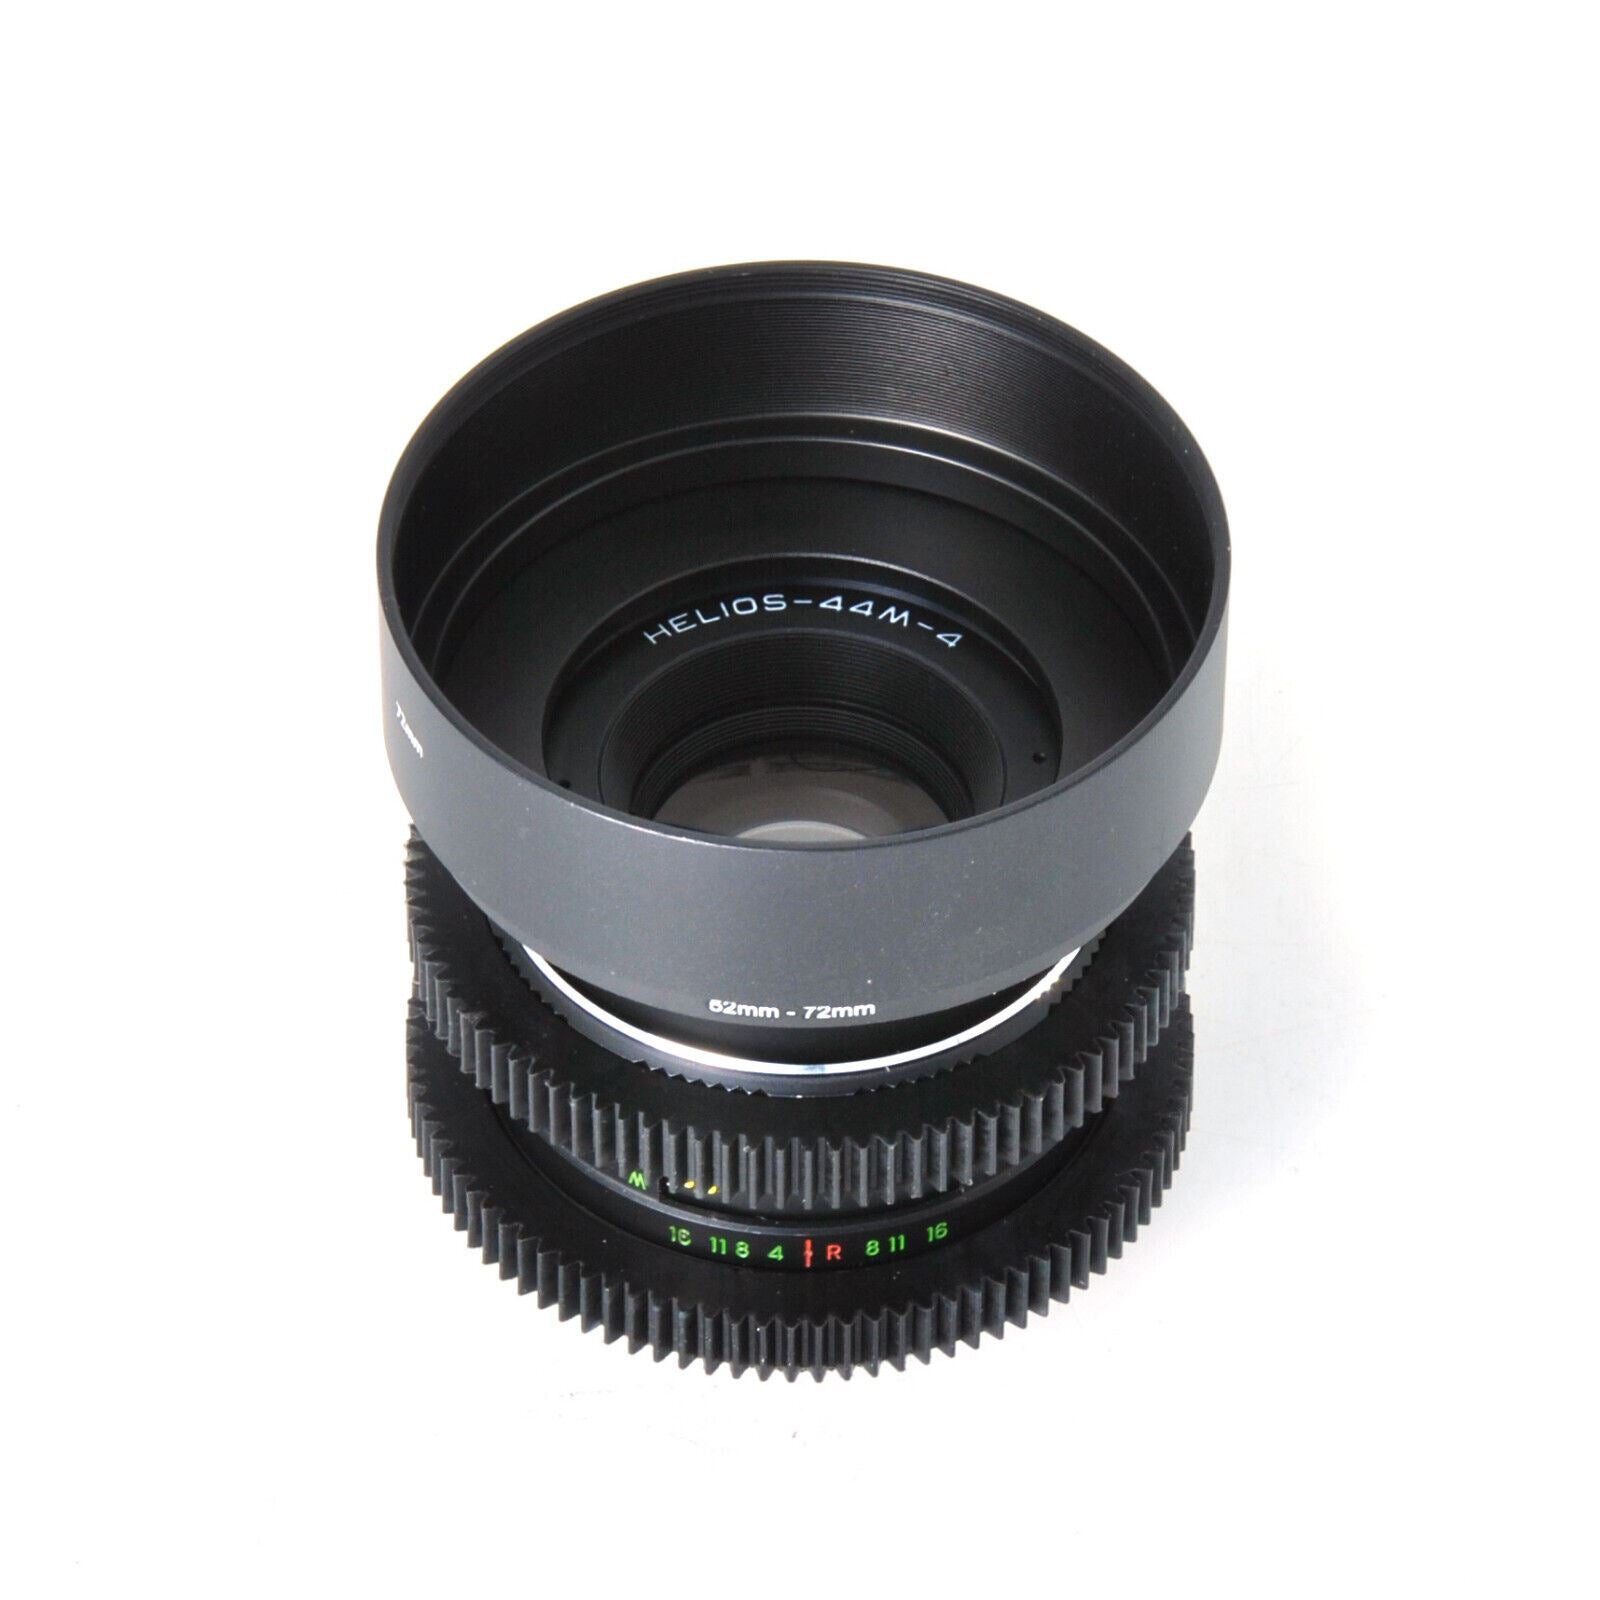 Helios-44M-4 58mm F2 Cine Mod Lens w/ Anamorphic Bokeh! Your Mount Adapted!